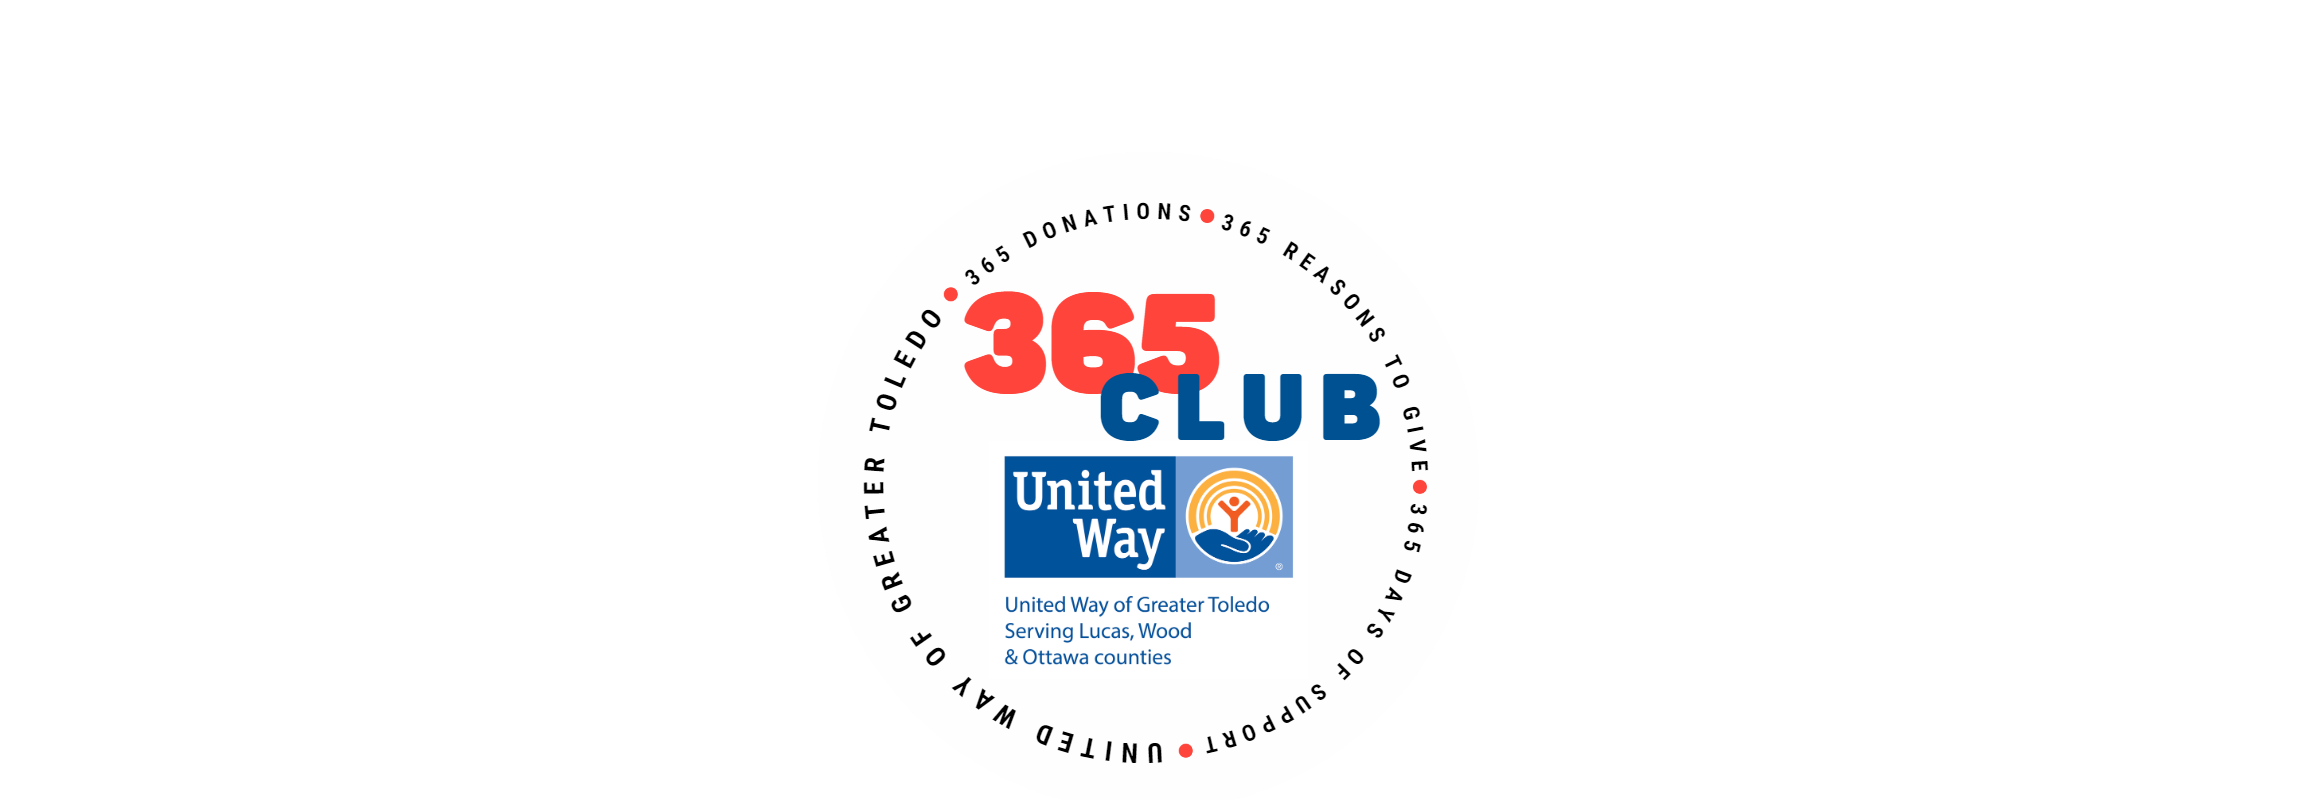 Join United Way's 365 Club